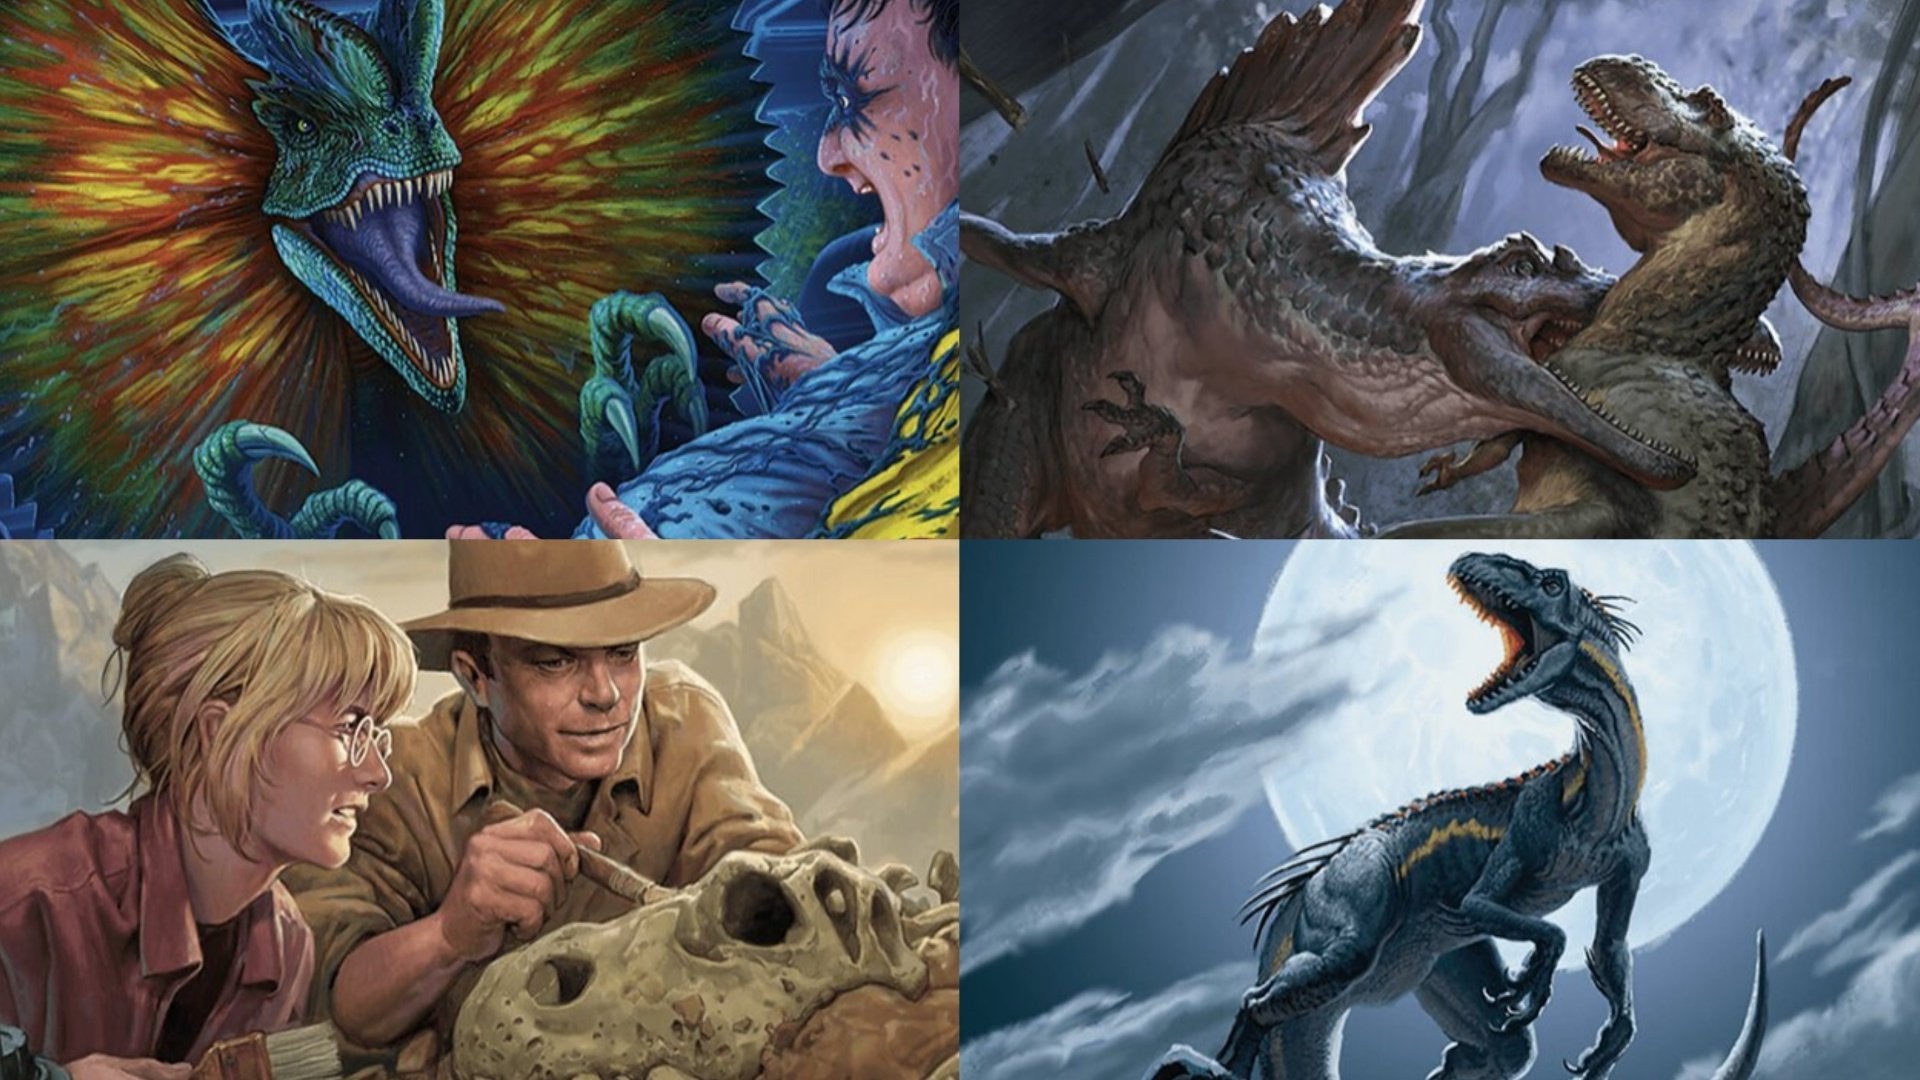 Characters from Jurassic Park and Jurassic World in MTG art.